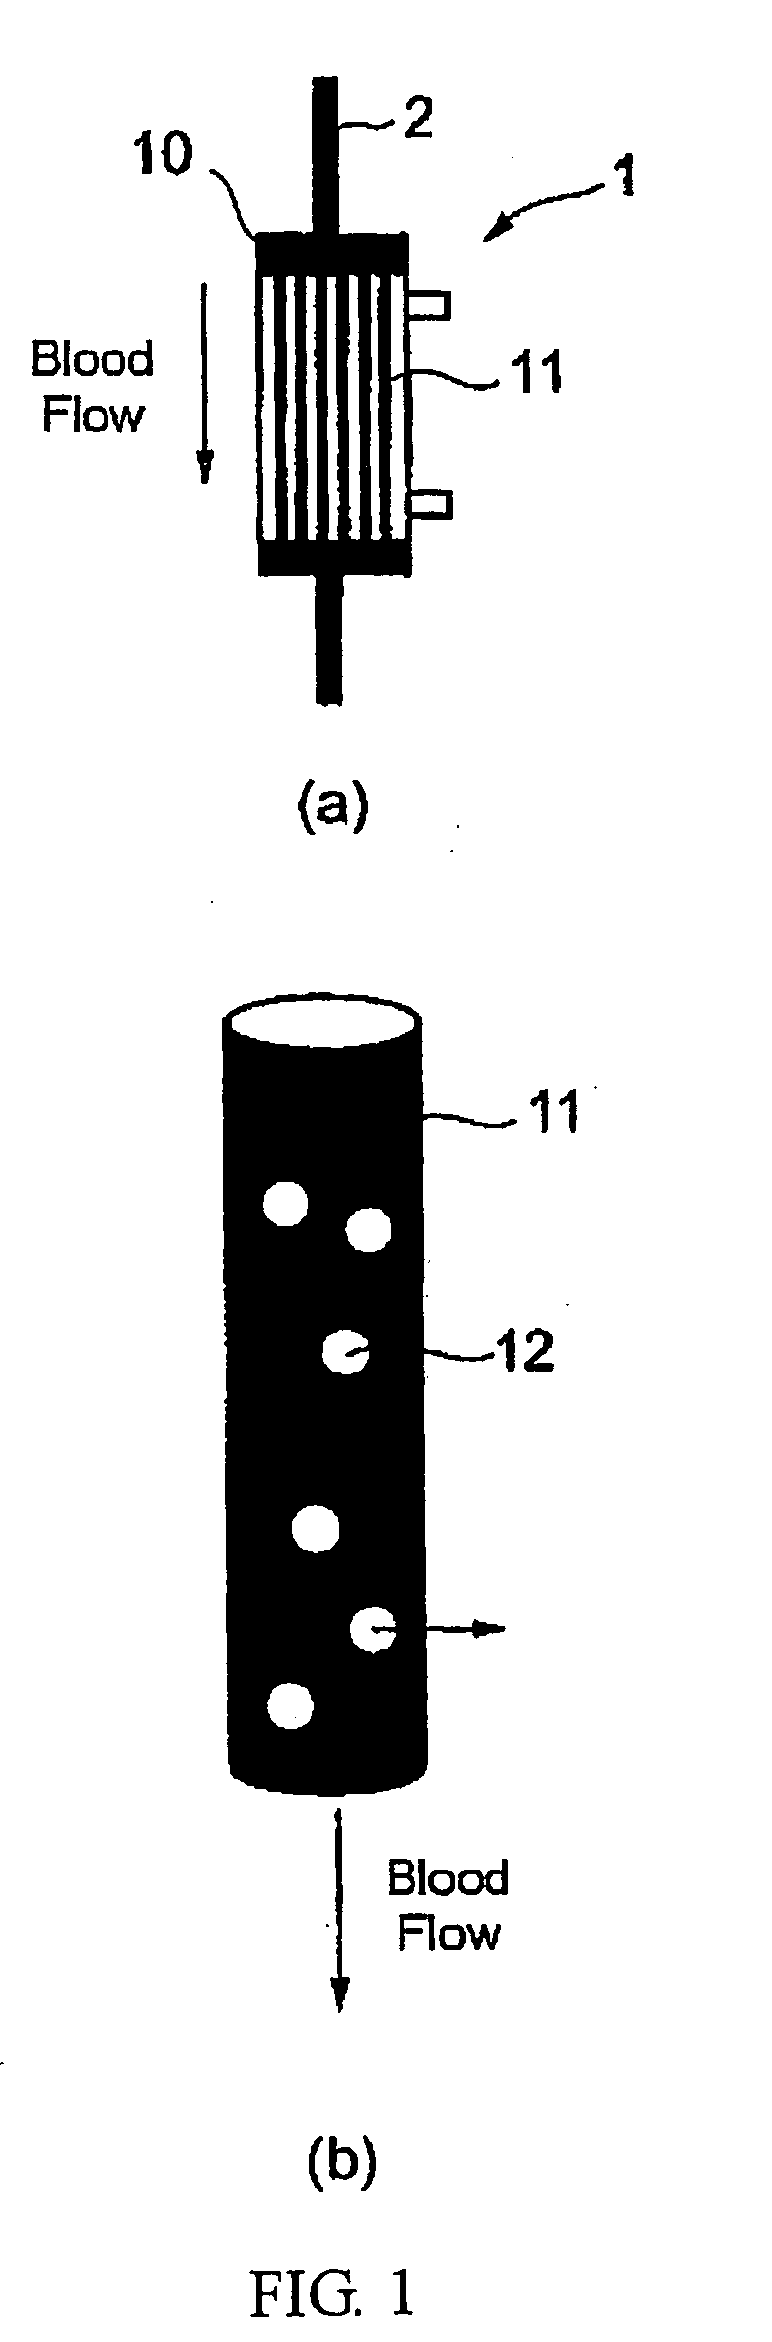 Method for calculating filter clogging factor and bed-side system